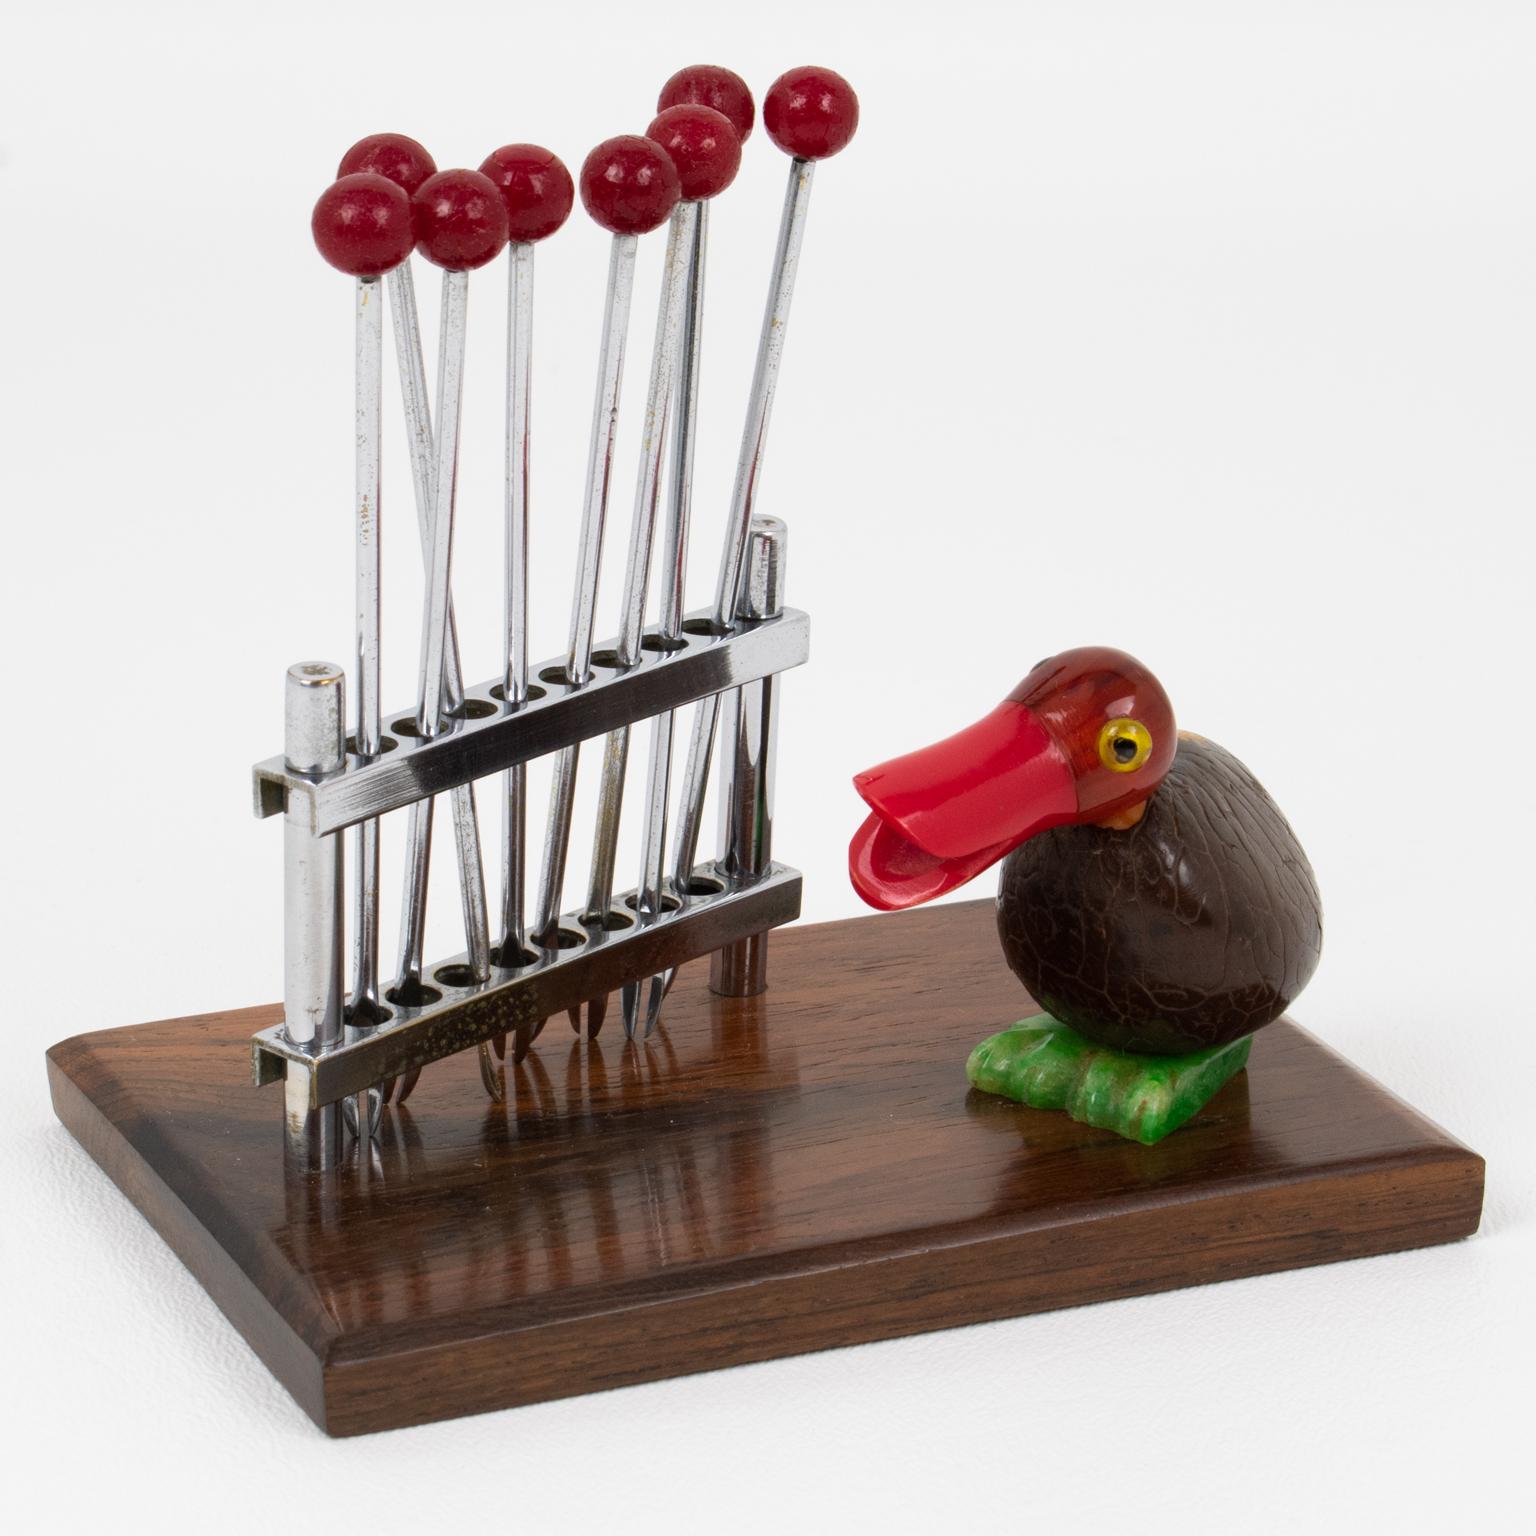 This lovely barware bar set cocktail pick was hand-crafted in France in the 1930s. The bar set features a Bakelite and Corozo nut bird facing a chromed metal fence turned into a fork holder. The metal fence holds eight metal cocktail forks with red